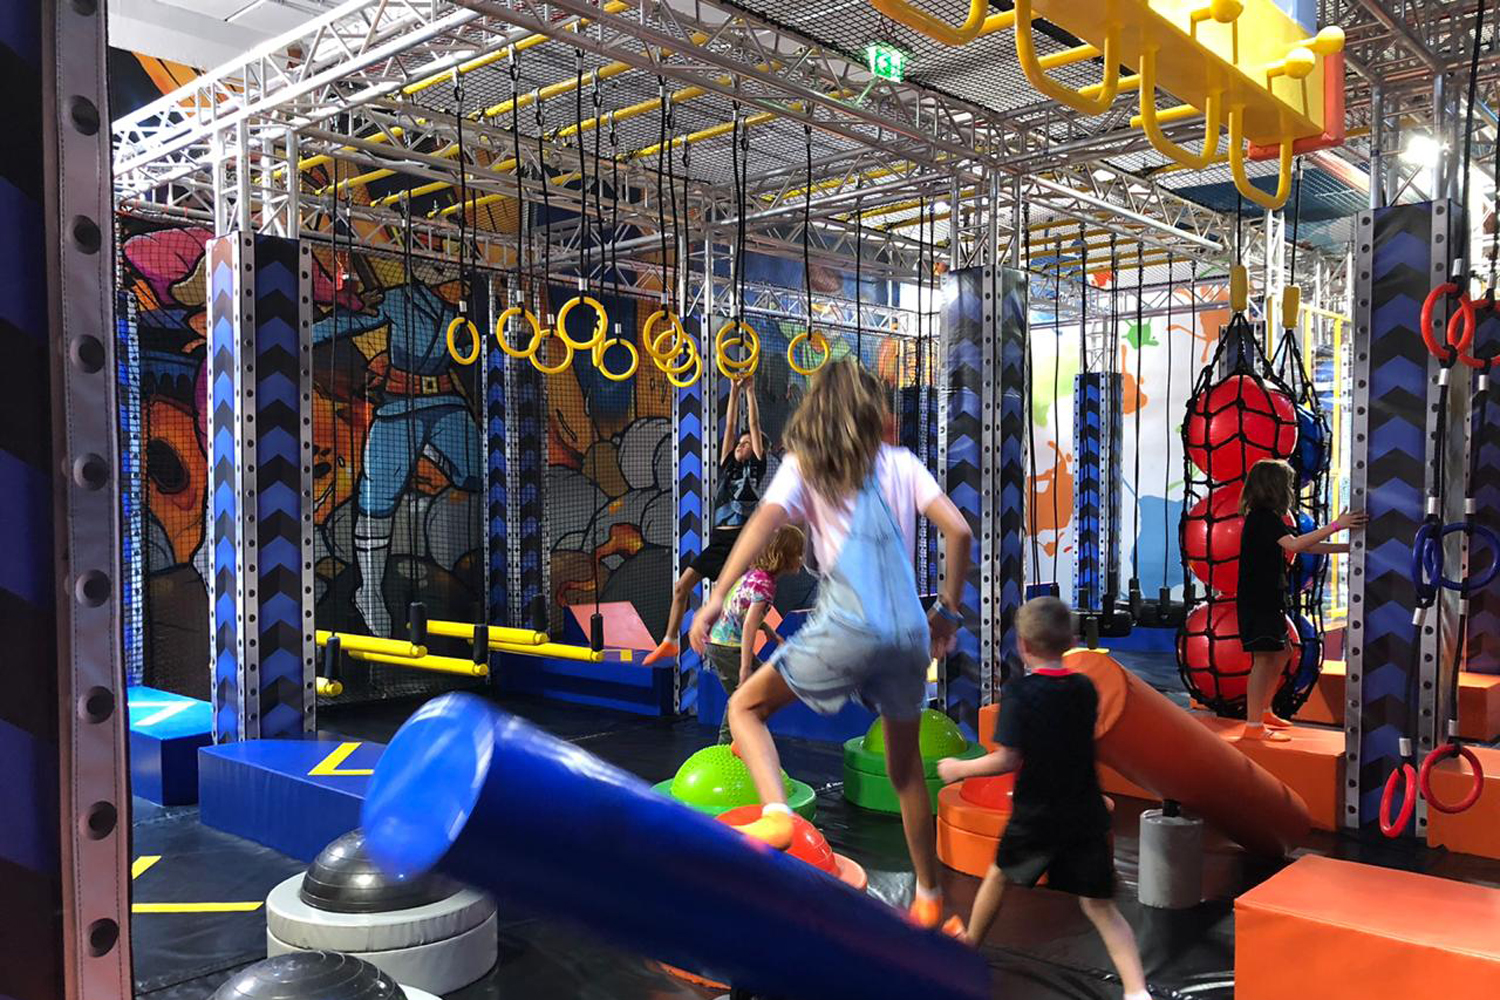 Air Maniax has opened in Abu Dhabi's Marina Mall | Kids | Time Out Abu